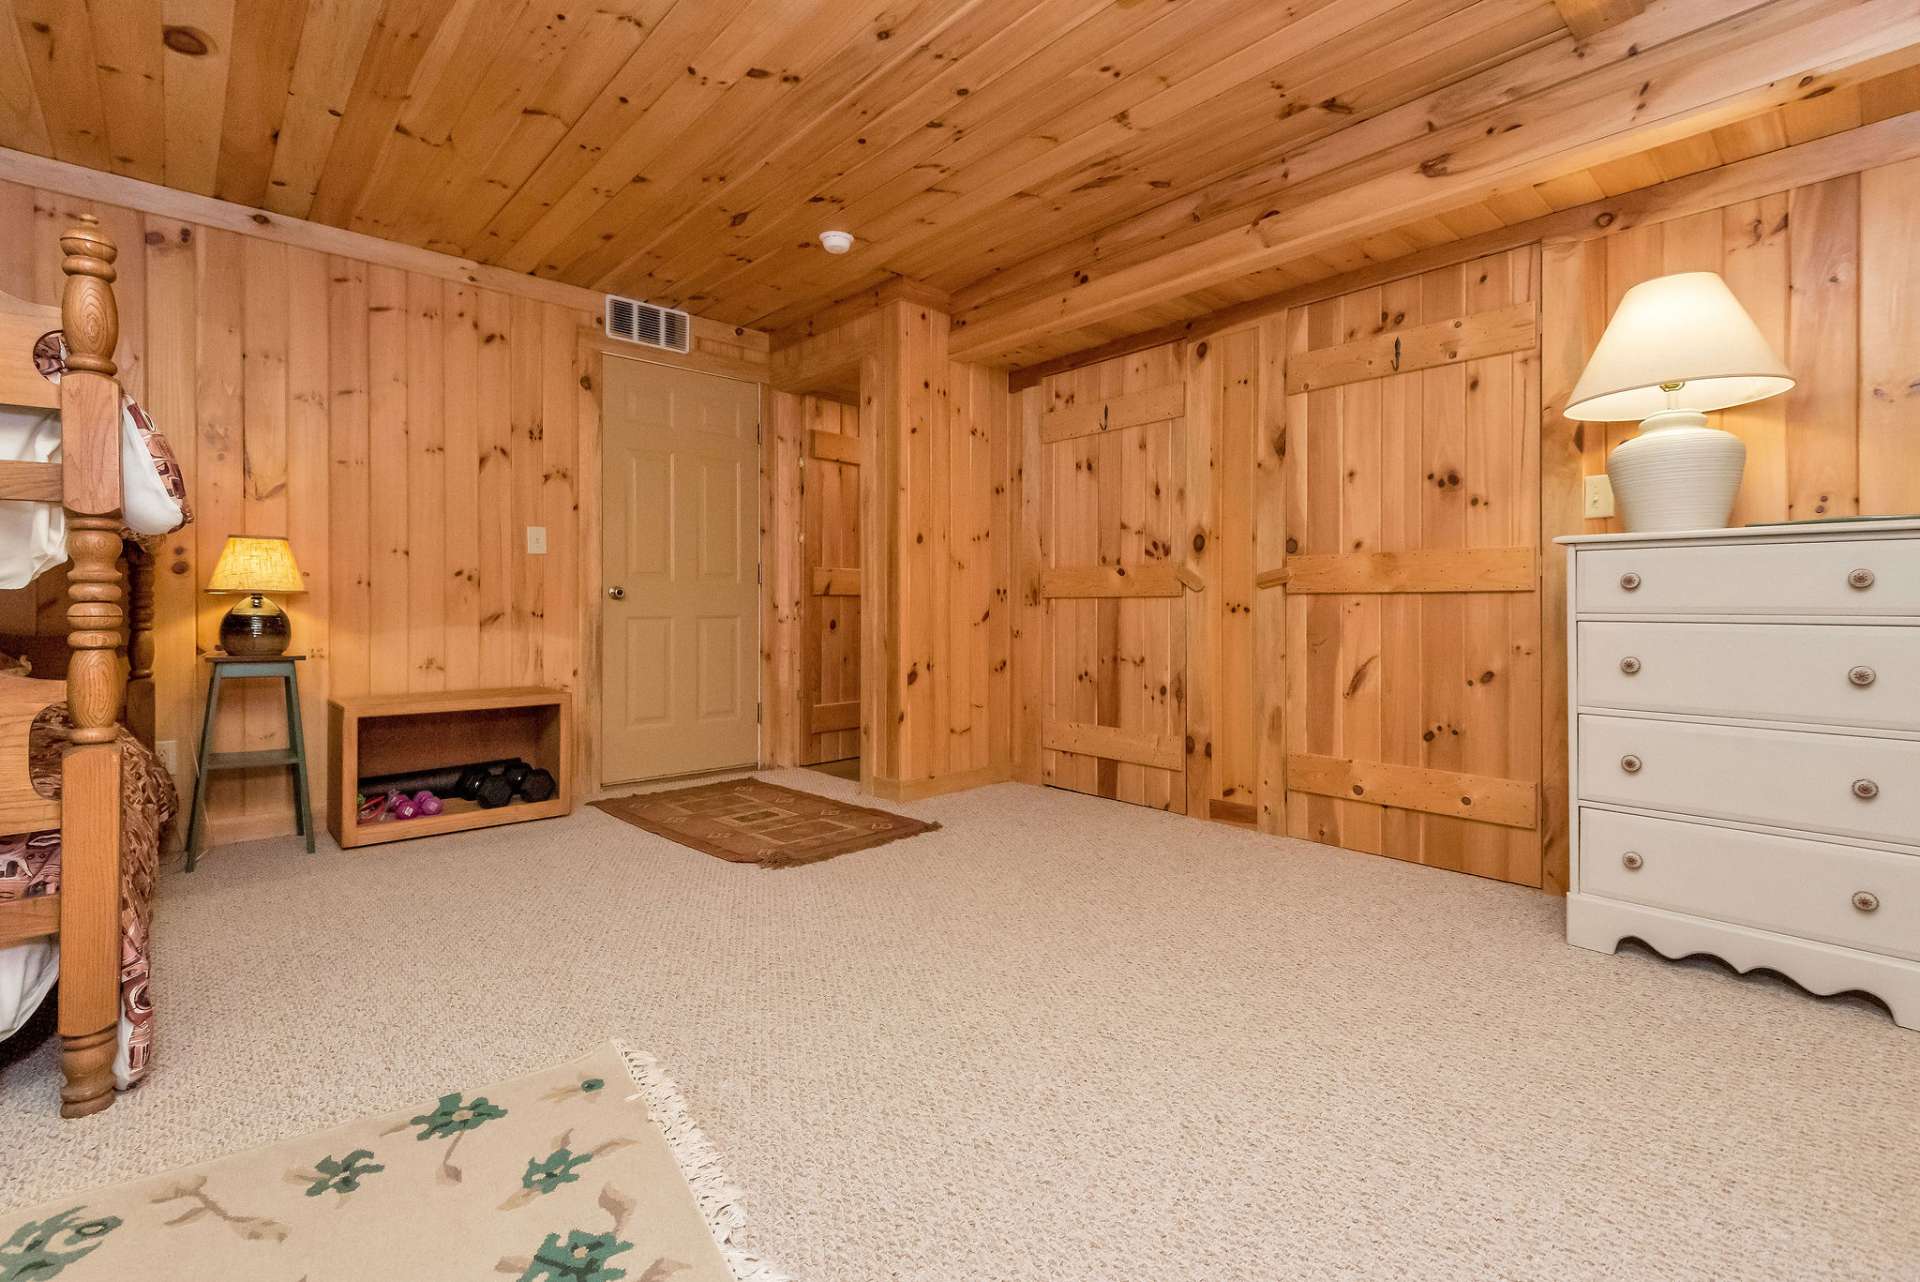 The additional storage with 2 access doors is a bonus to this cabin,